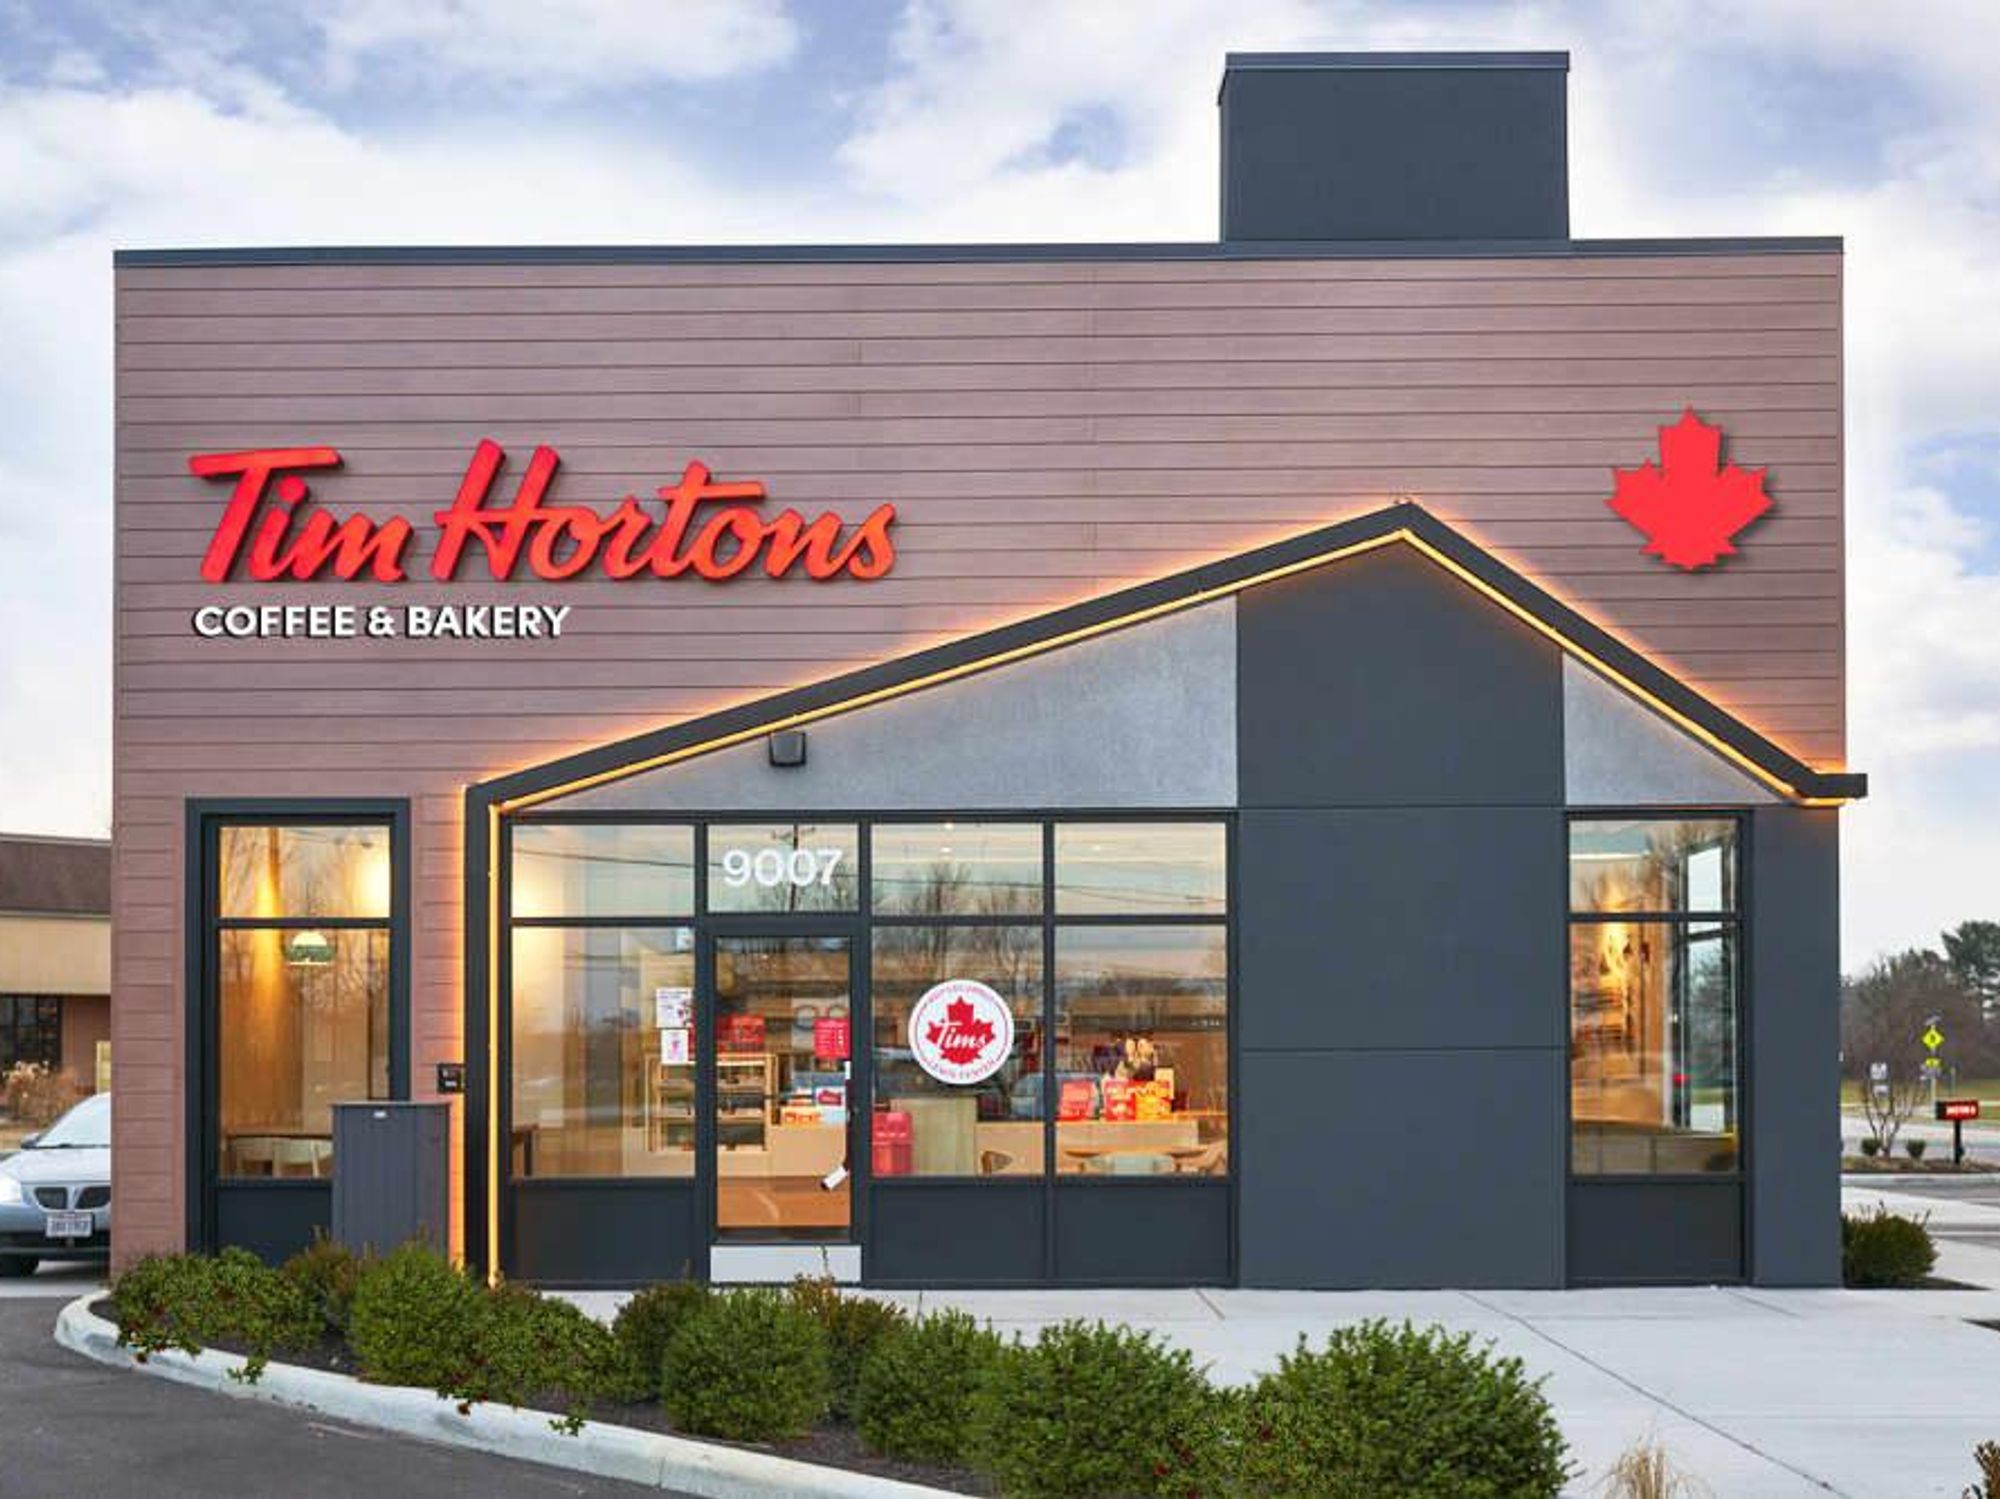 Canadian coffee and bakery brand Tim Hortons planning to open 15